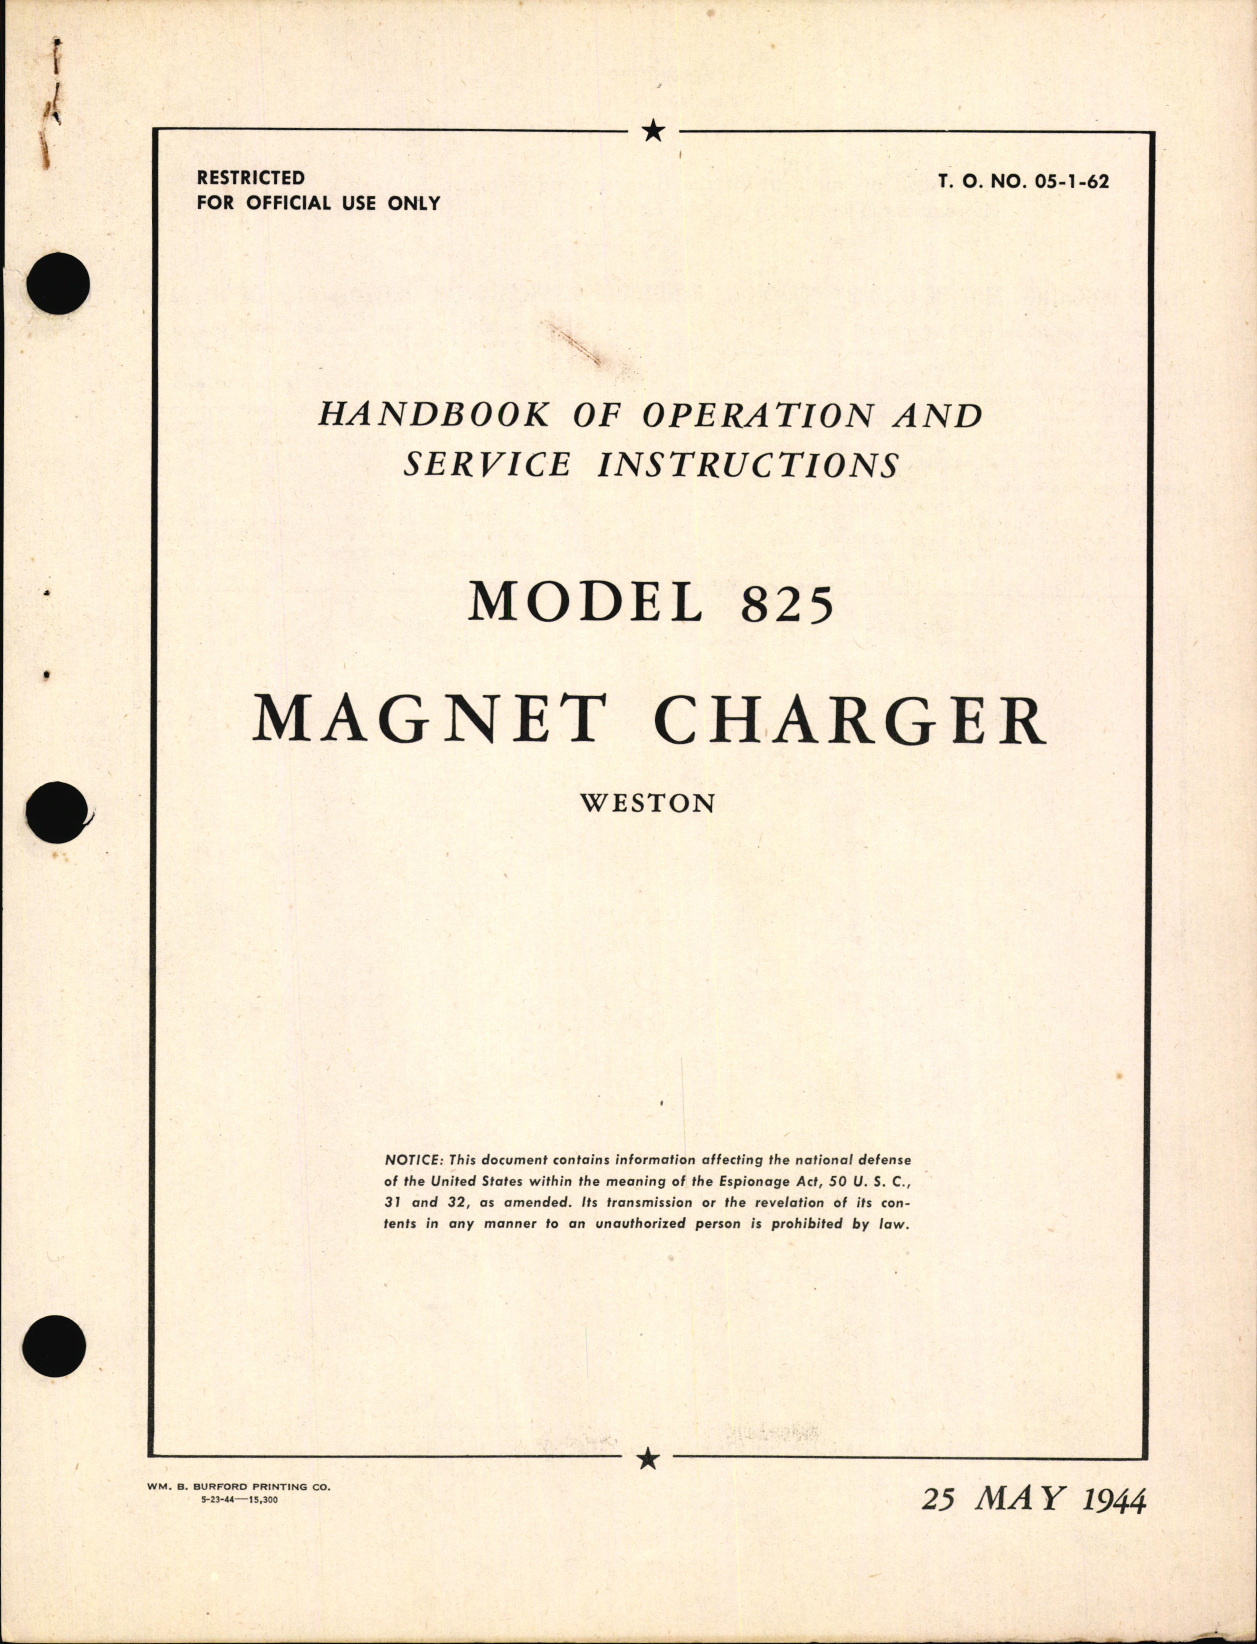 Sample page 5 from AirCorps Library document: Operation and Service Instructions for Model 825 Magnet Charger